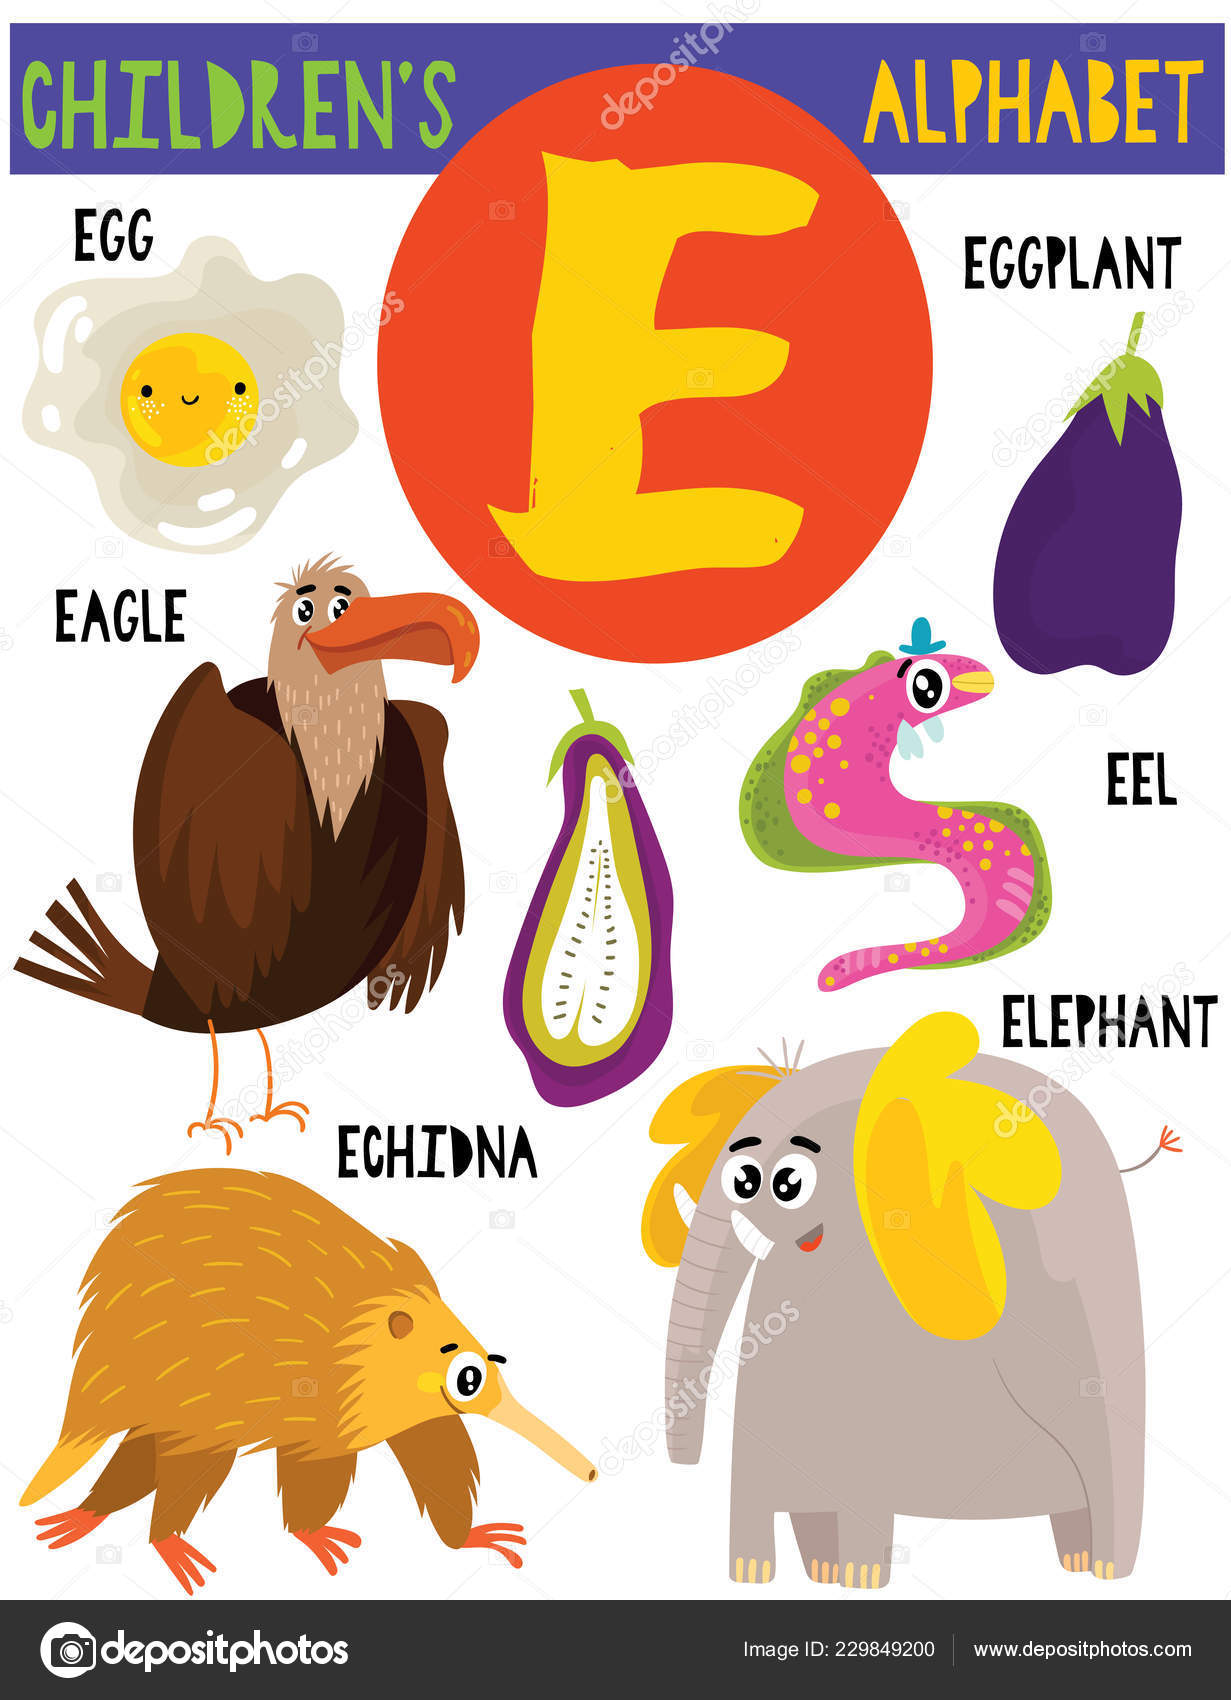 Animals That Start With The Letter E - Bilscreen